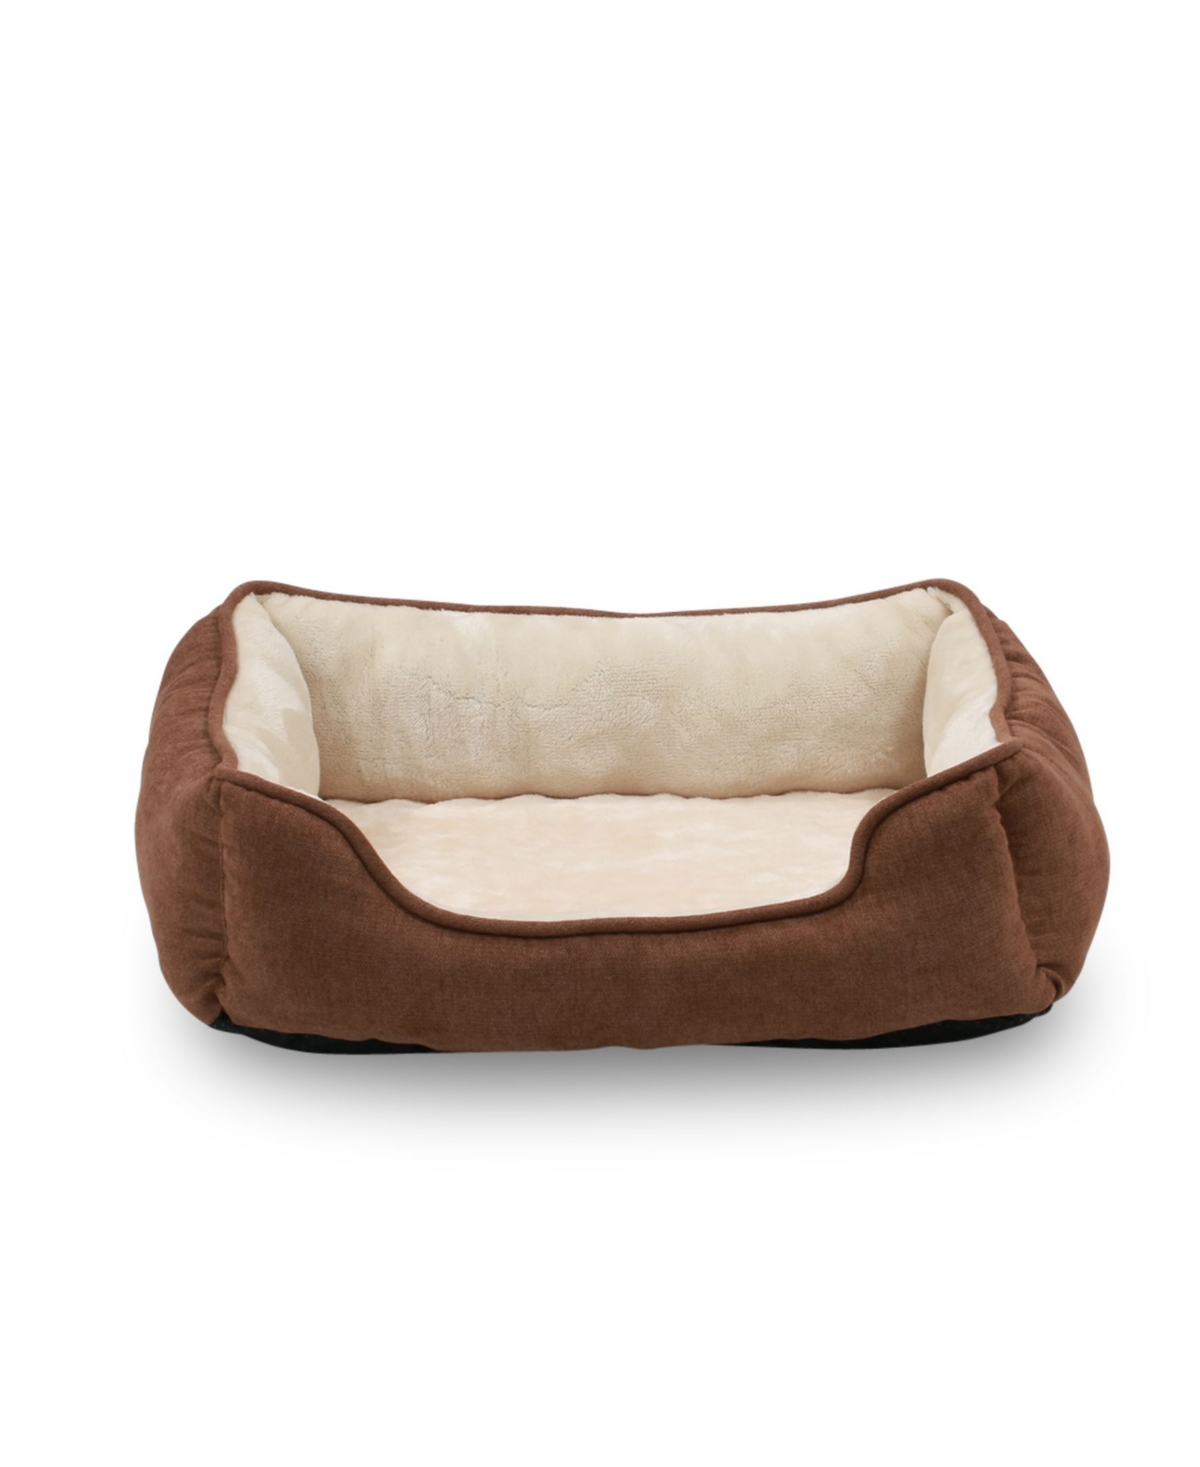 Happycare Textiles Orthopedic Rectangle Bolster Pet Bed, Super Soft Plush - Brown